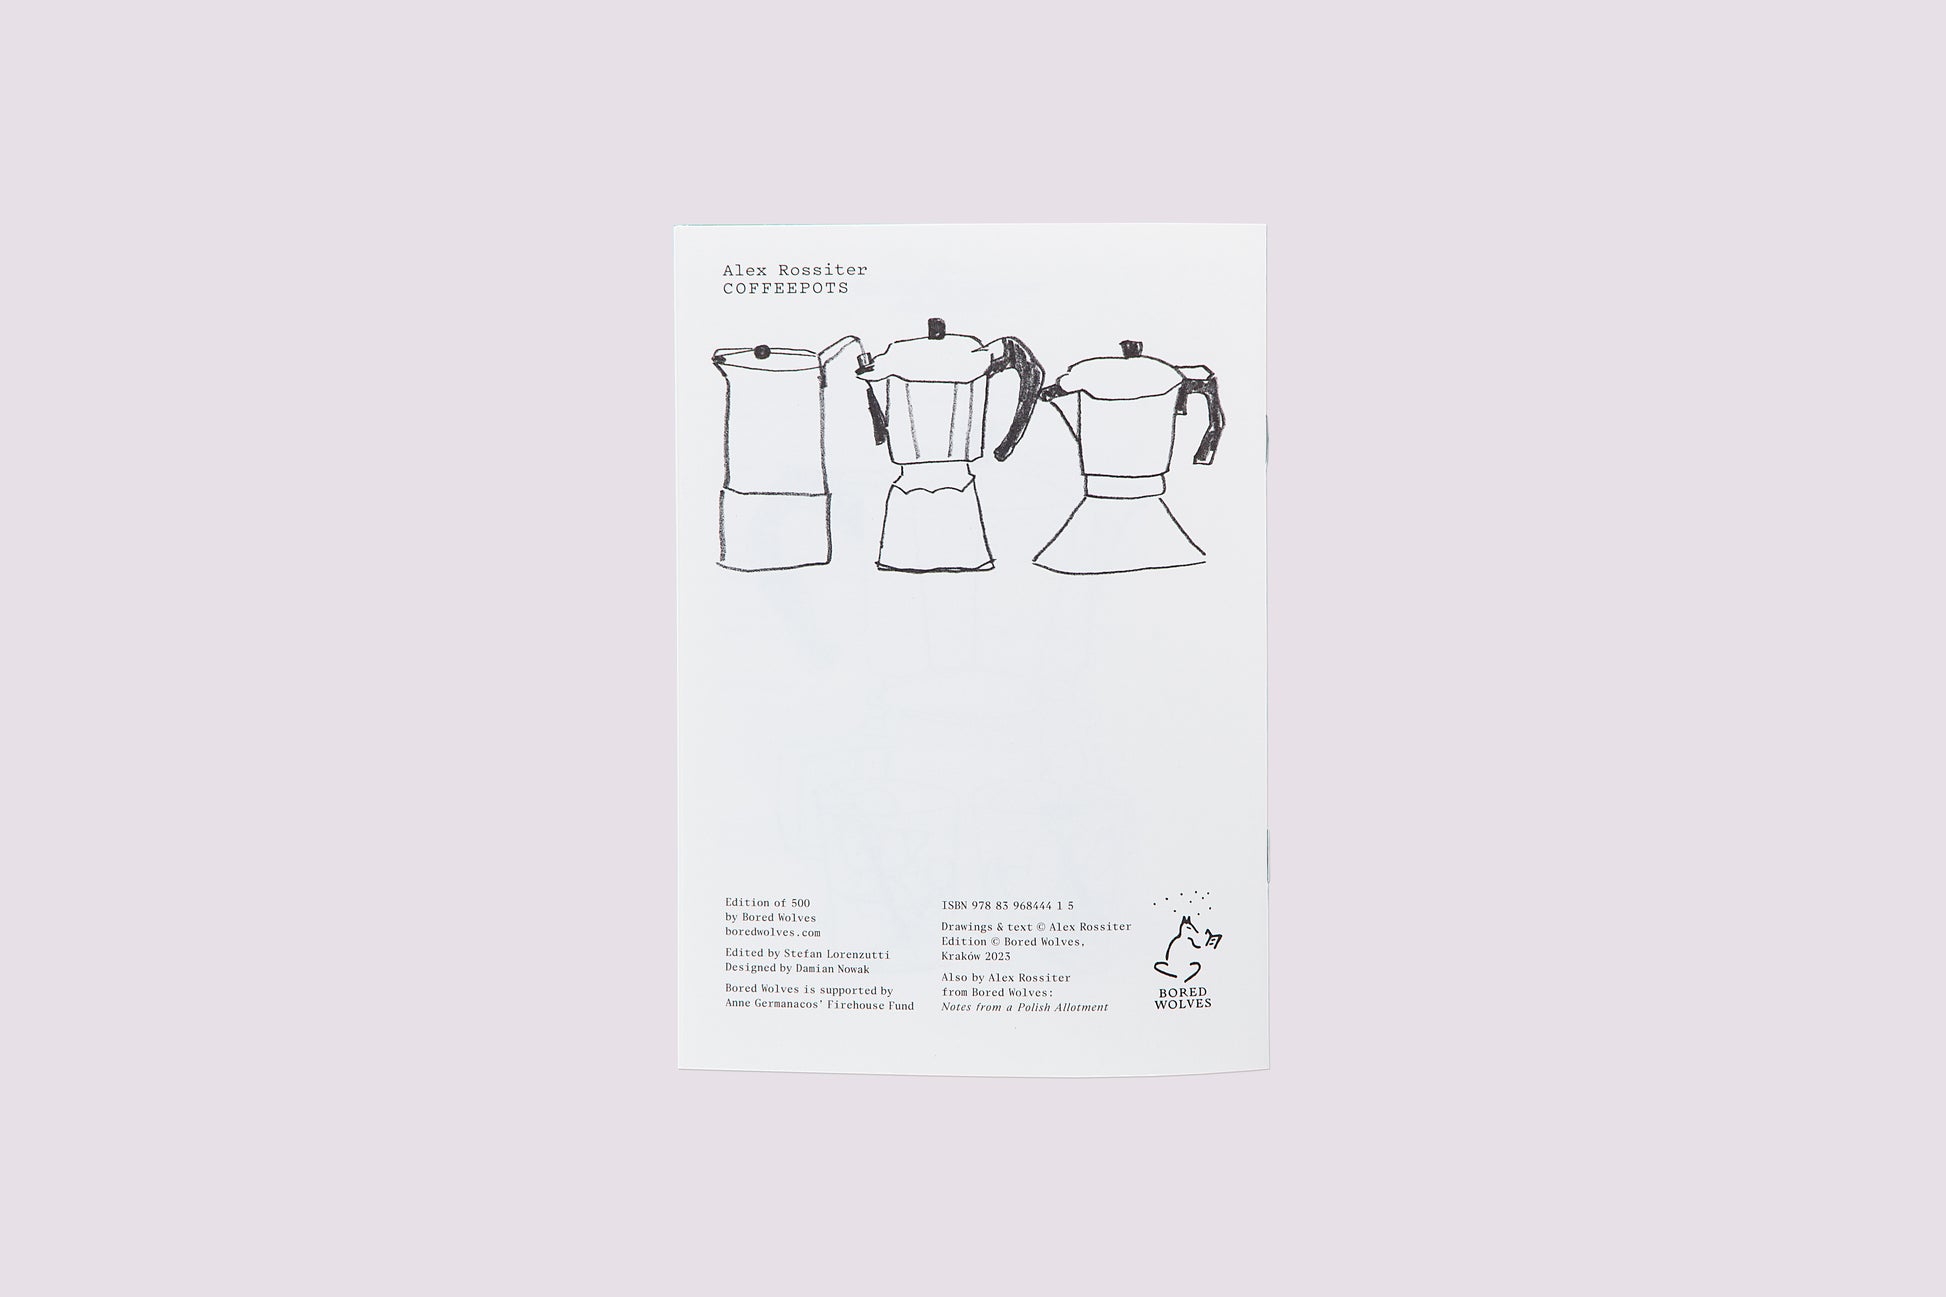 Coffeepots/Alex Rossiter by Bored Wolves